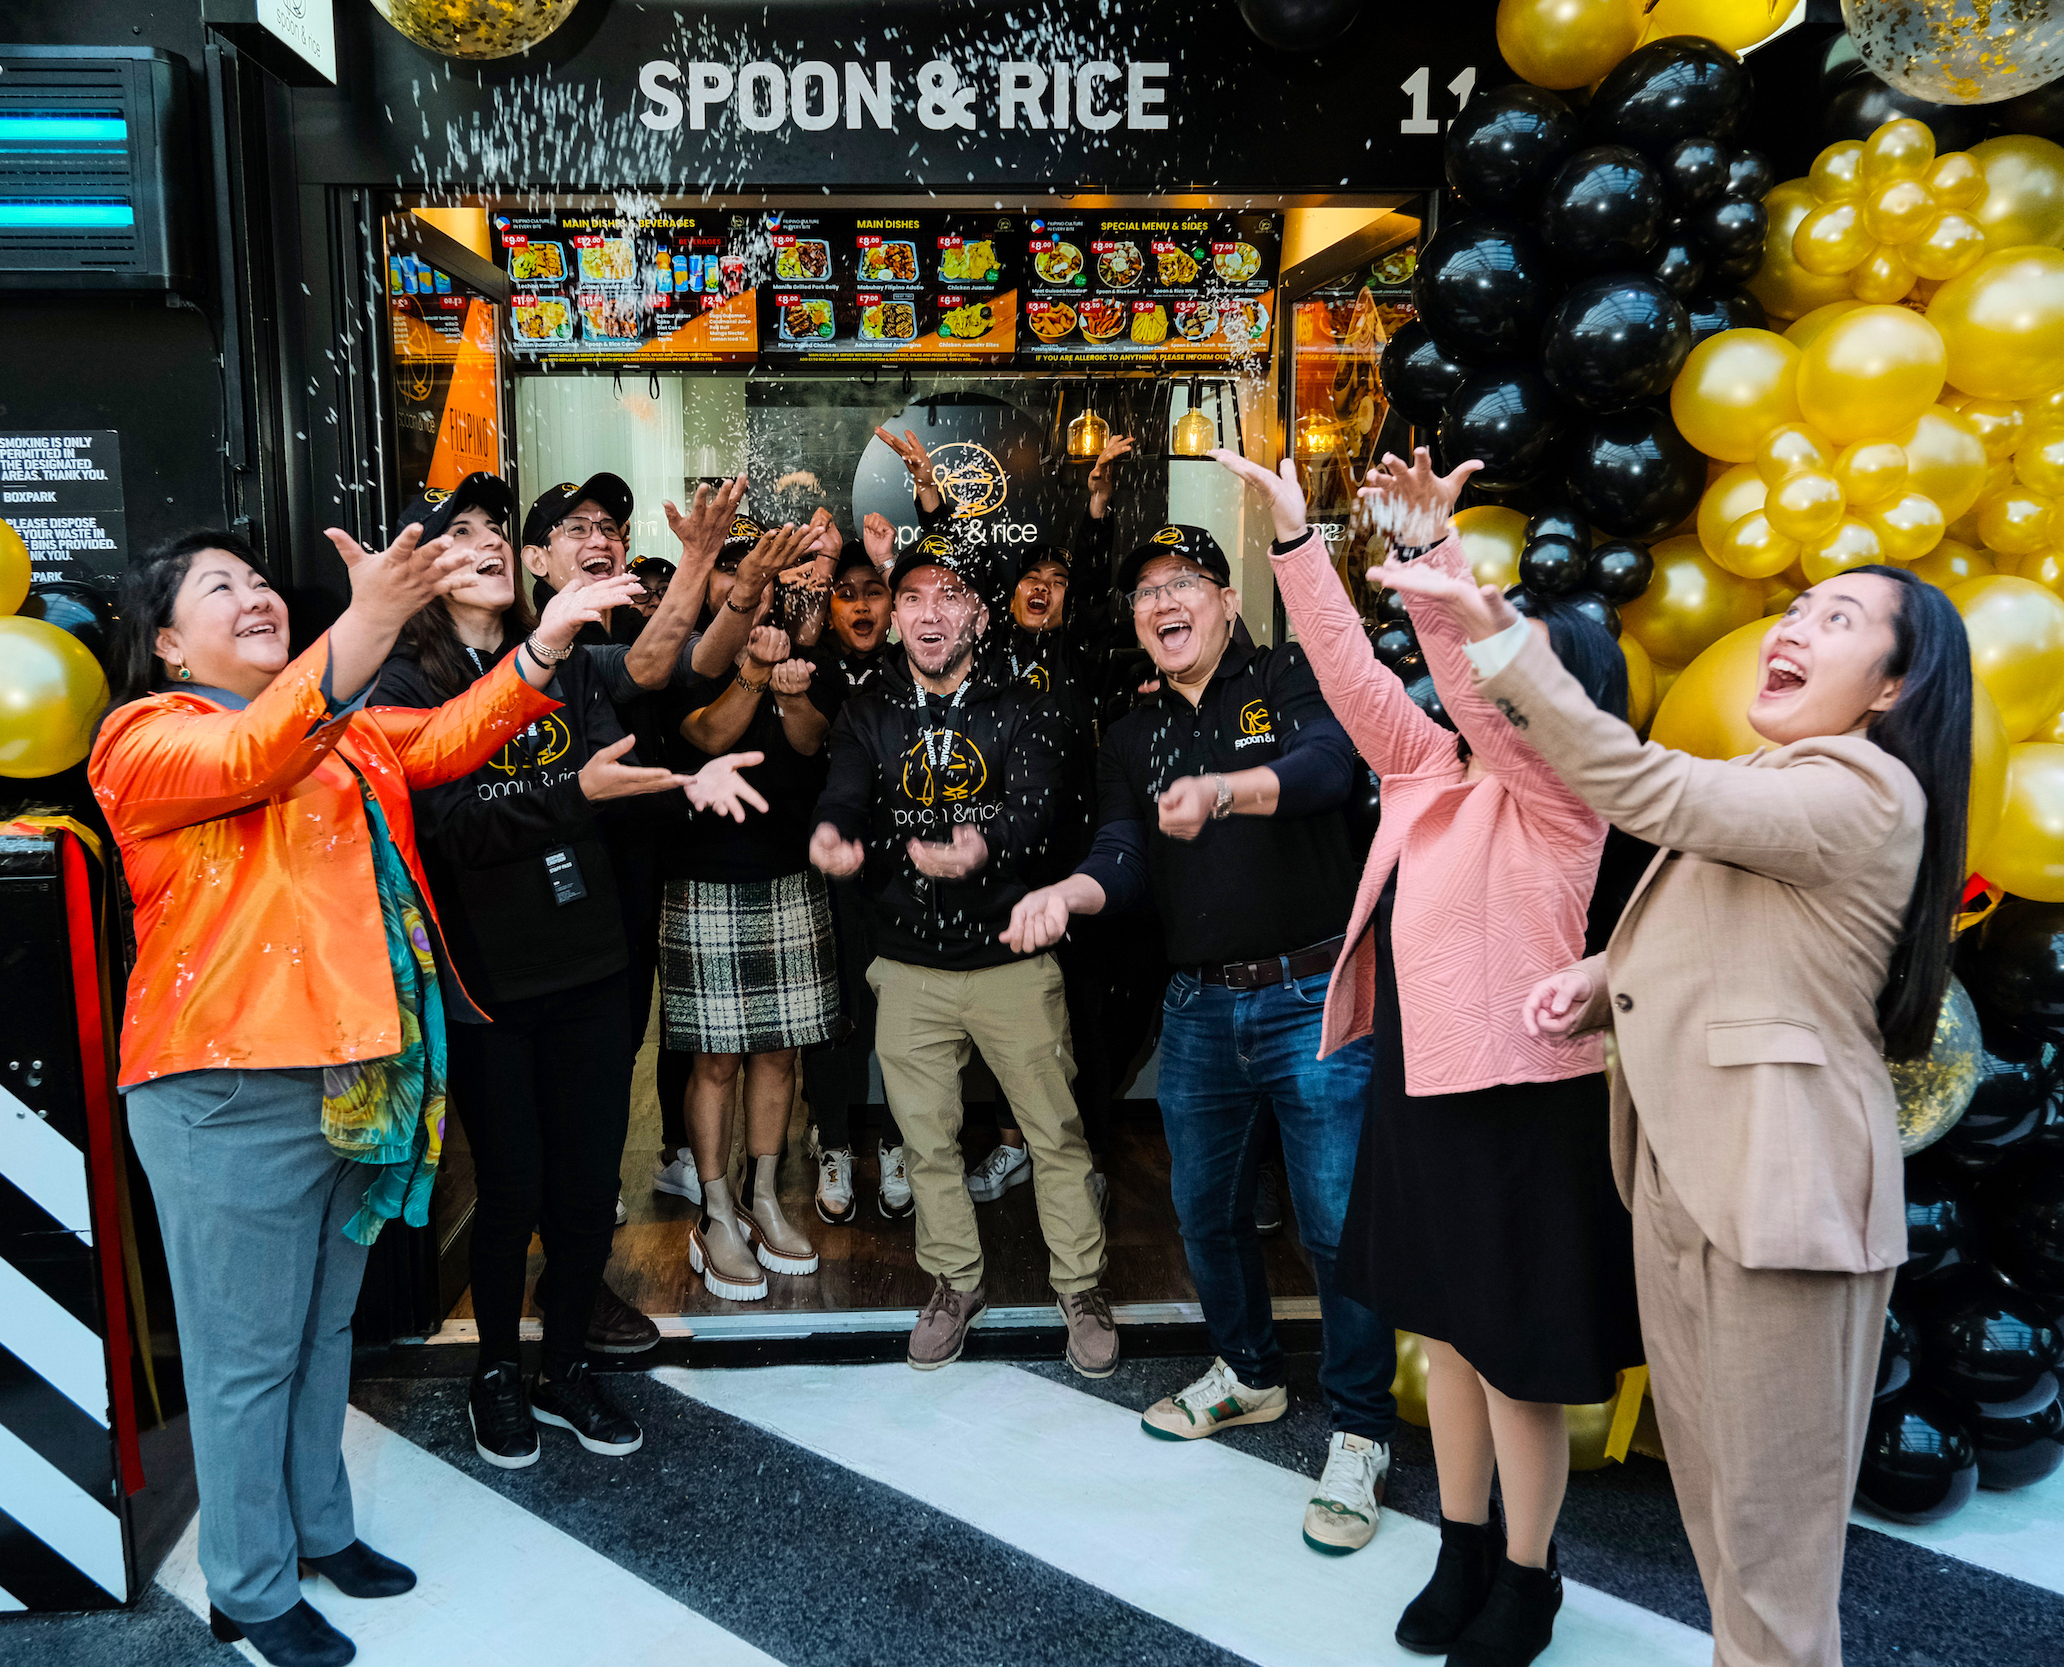 spoon and rice Croydon opening